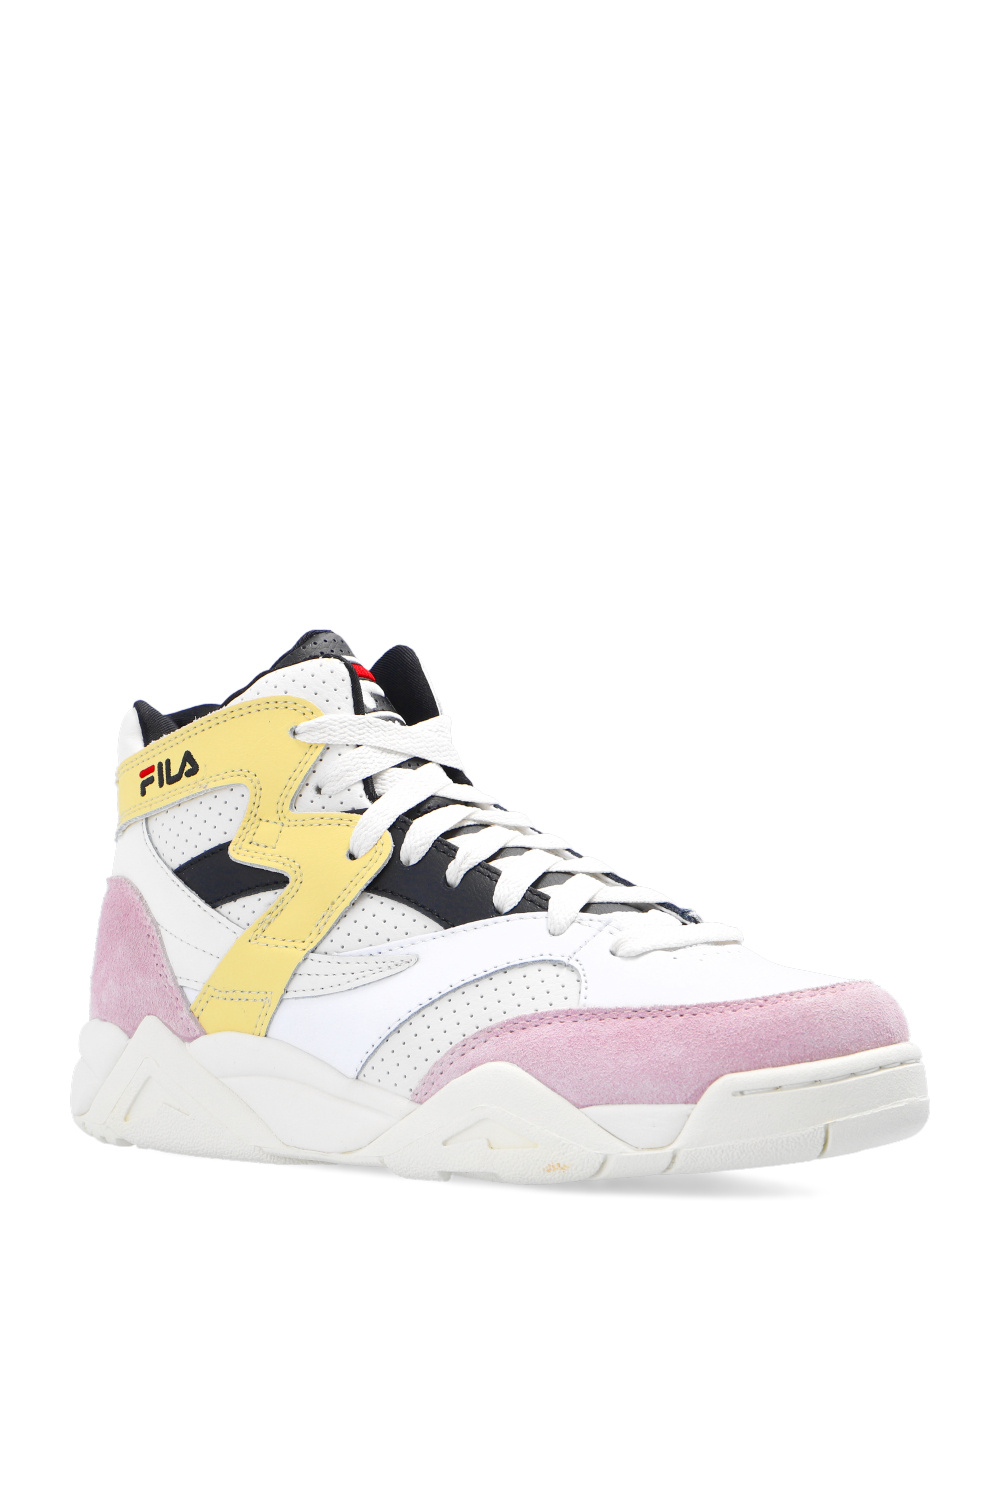 Fila ‘M-Squad’ high-top sneakers